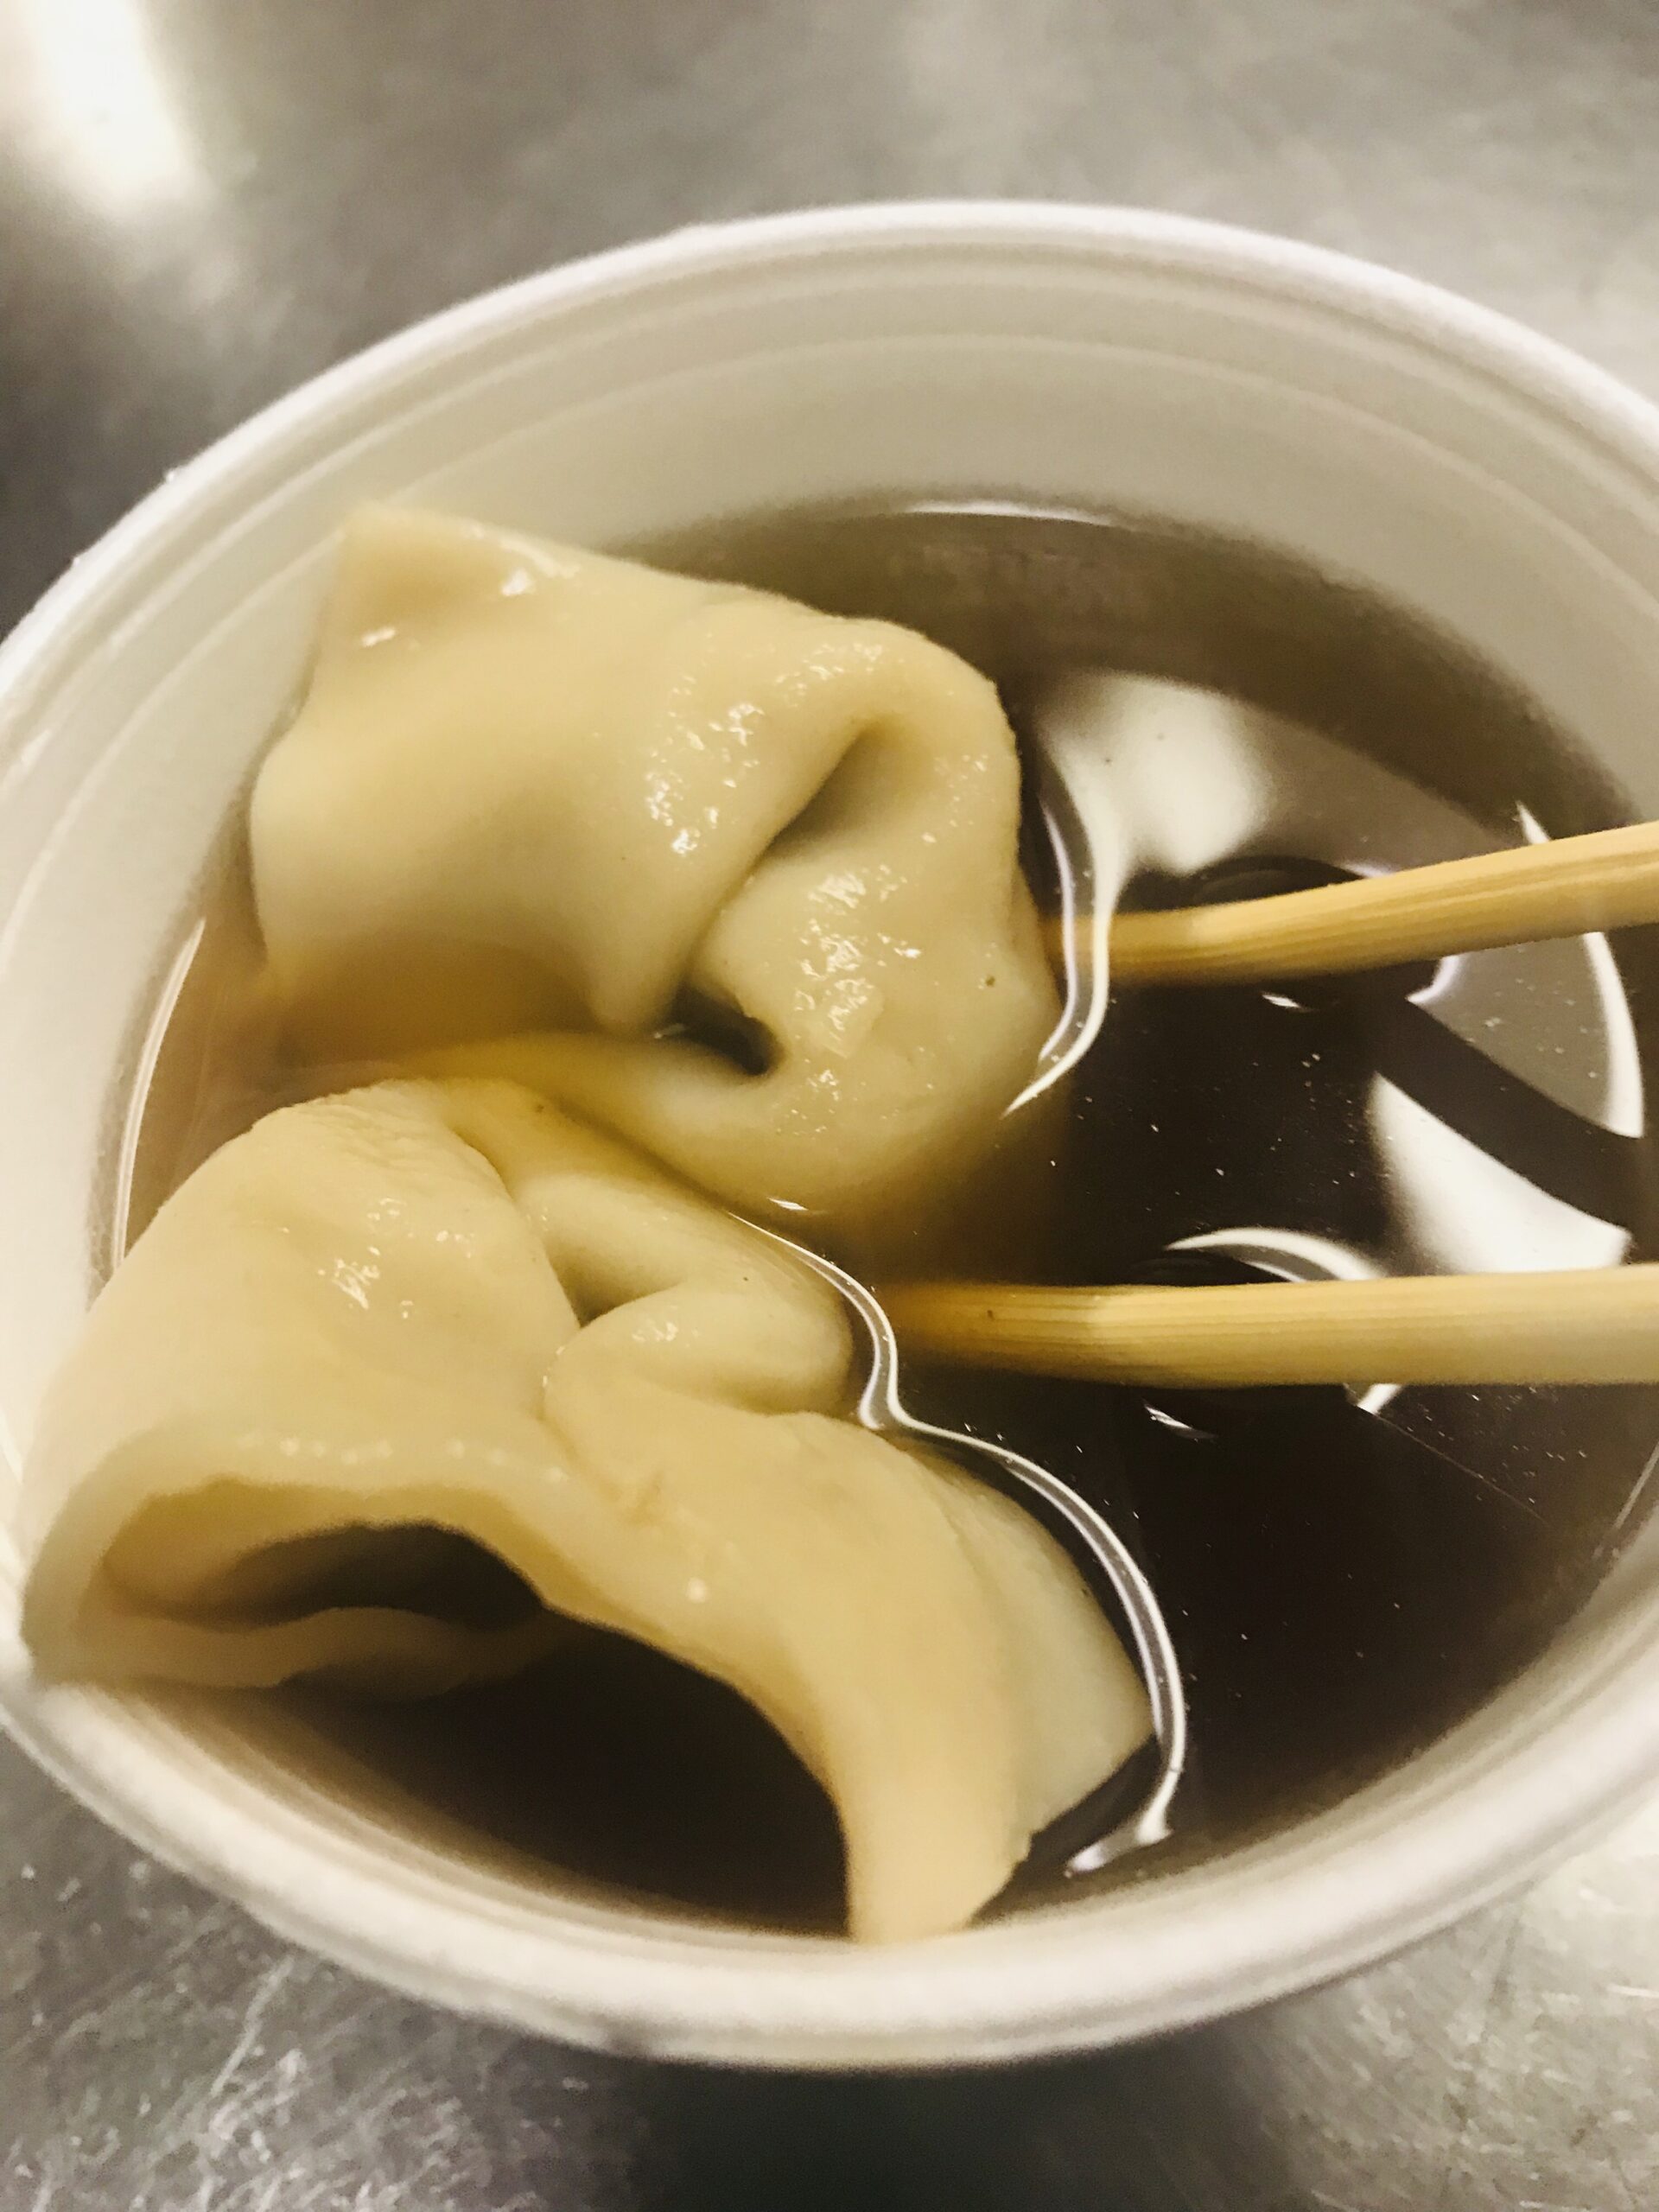 Food 365, Day 238: Wonton Soup from Mooncake foods